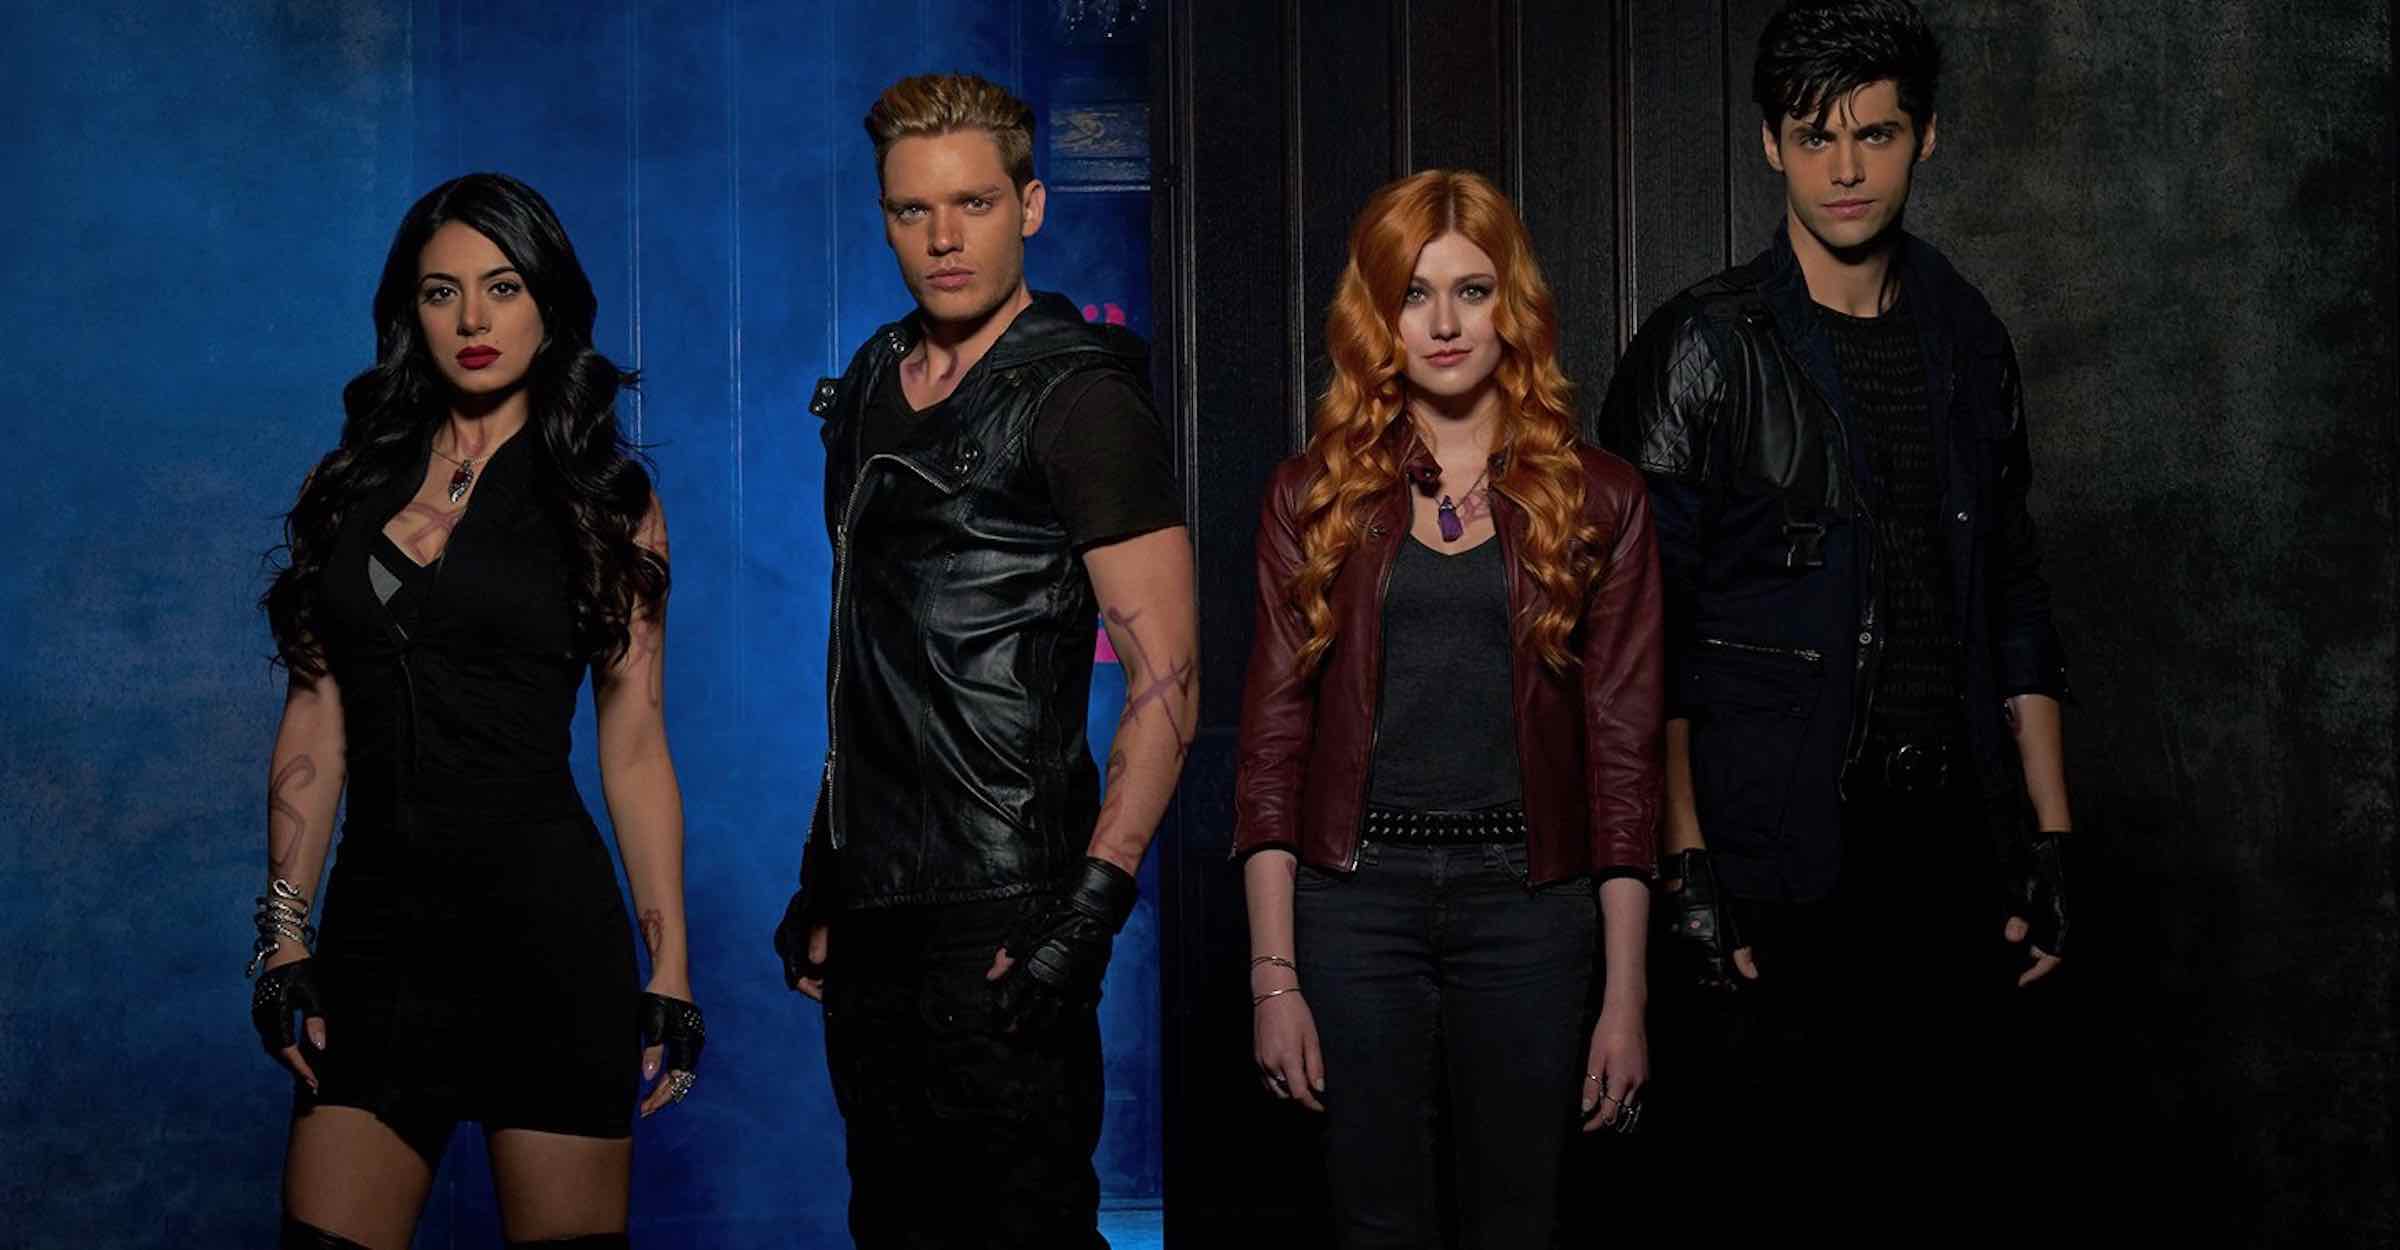 We throw it back to season 1 of 'Shadowhunters' and bring another 'Shadowhunters' quiz all about that first crush excitement.